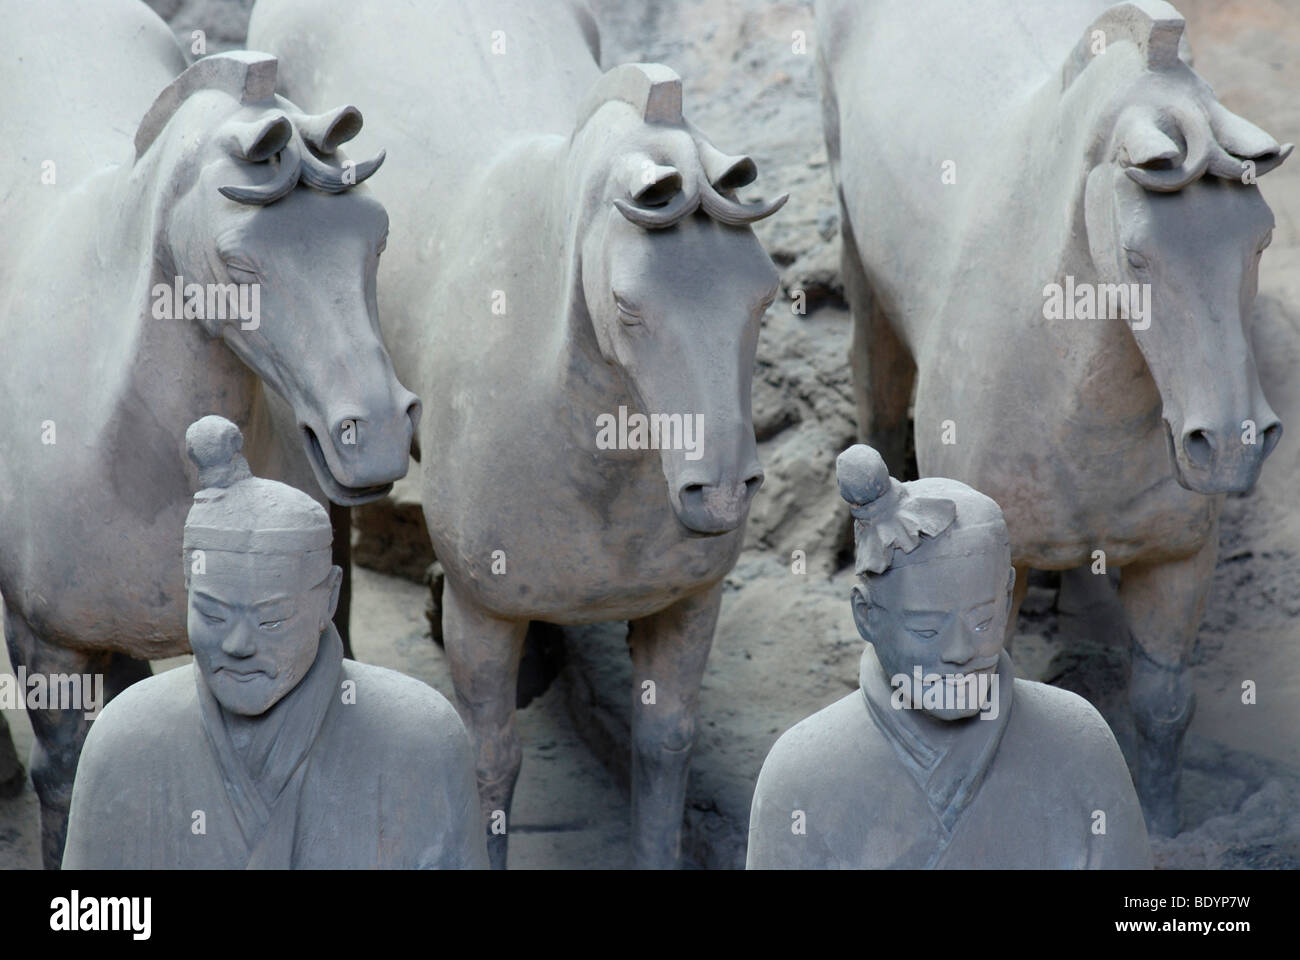 Terracotta army, part of the burial site, Hall 1, mausoleum of the 1st Emperor Qin Shihuangdi in Xi'an, Shaanxi Province, China Stock Photo